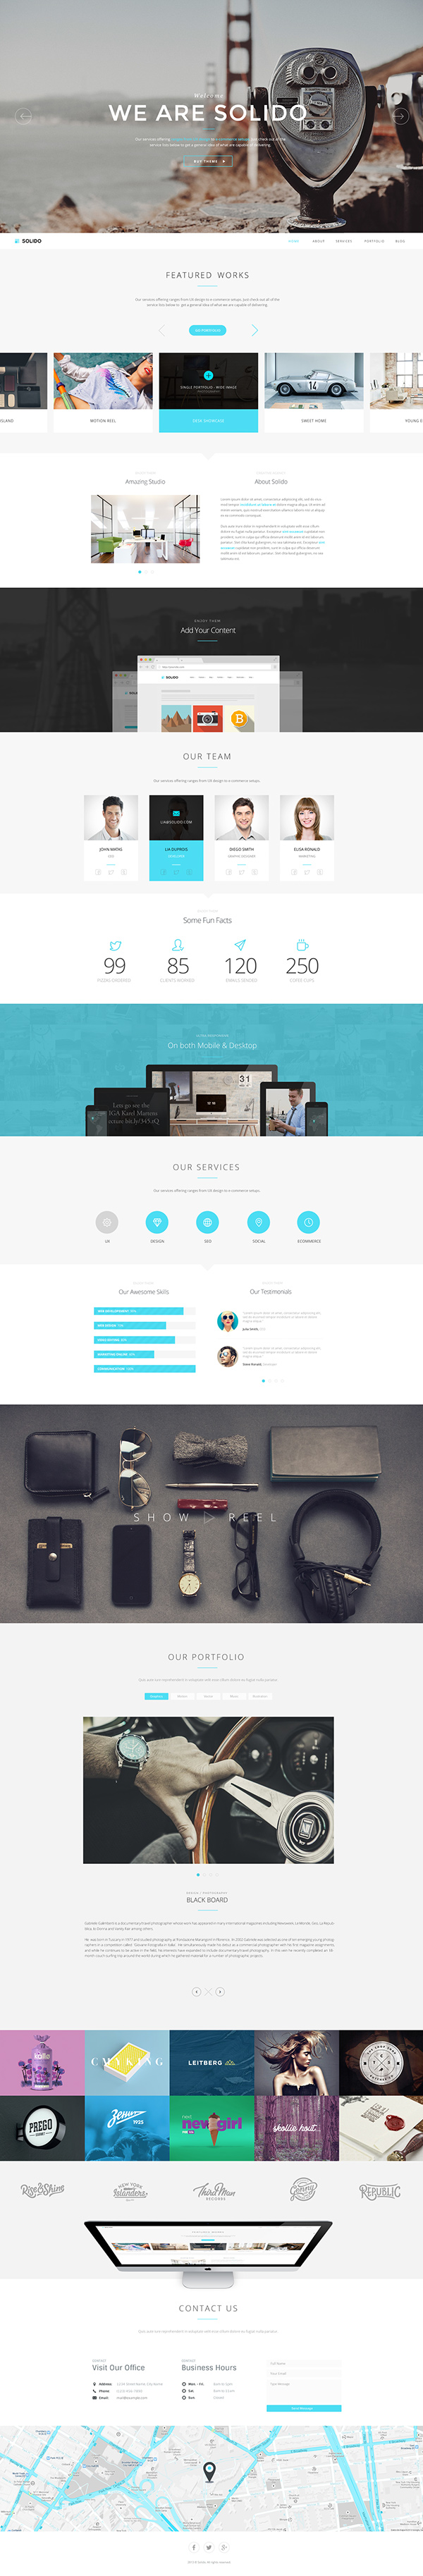 Solido - Responsive One Page Parallax Template - 2